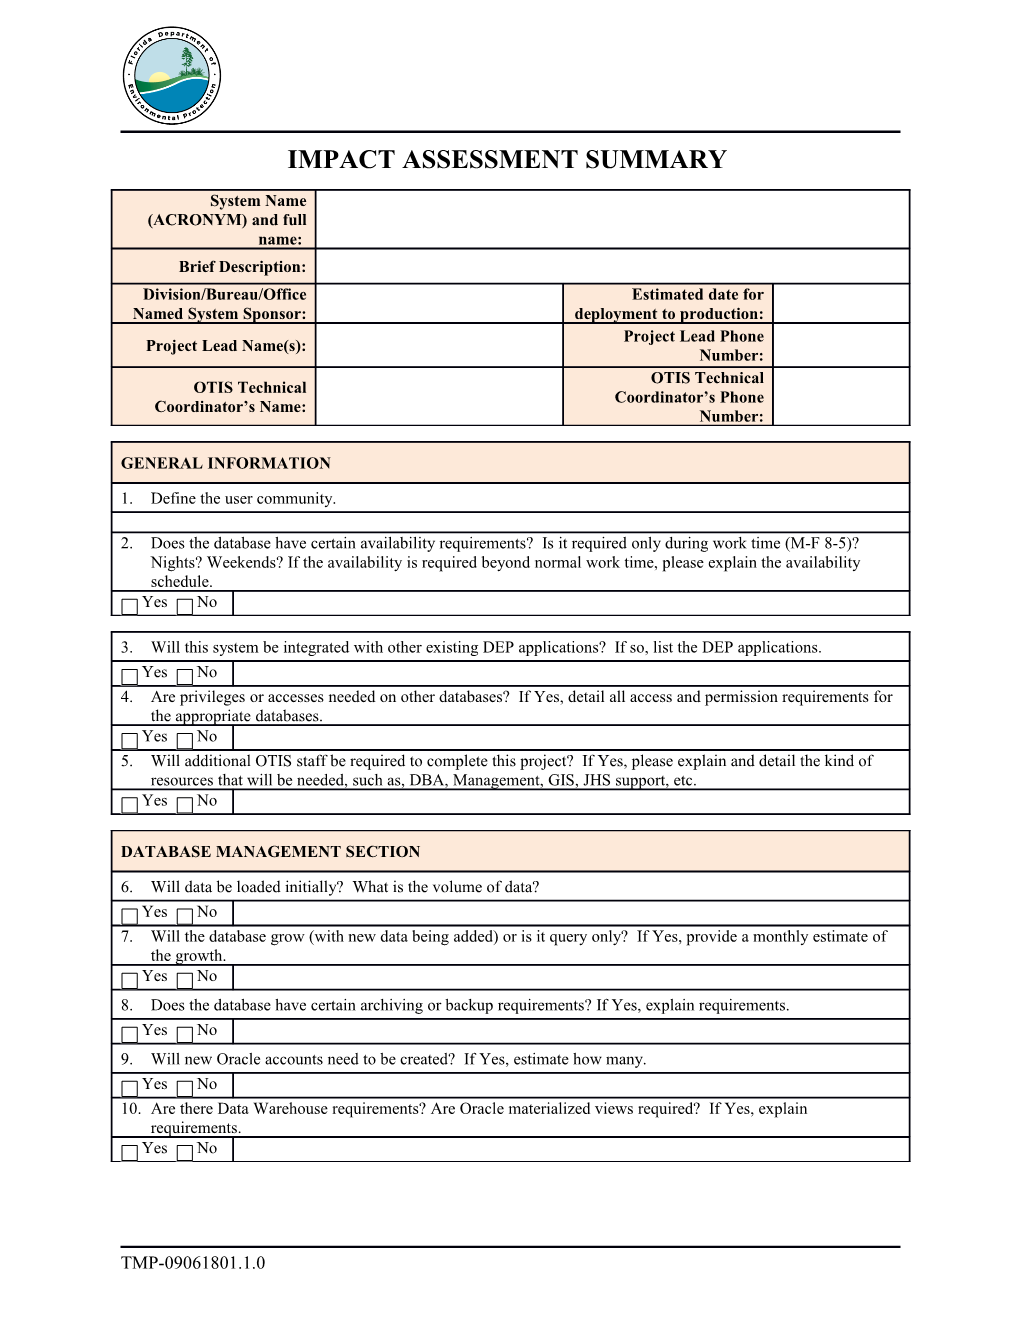 Impact Assessment Summary Template